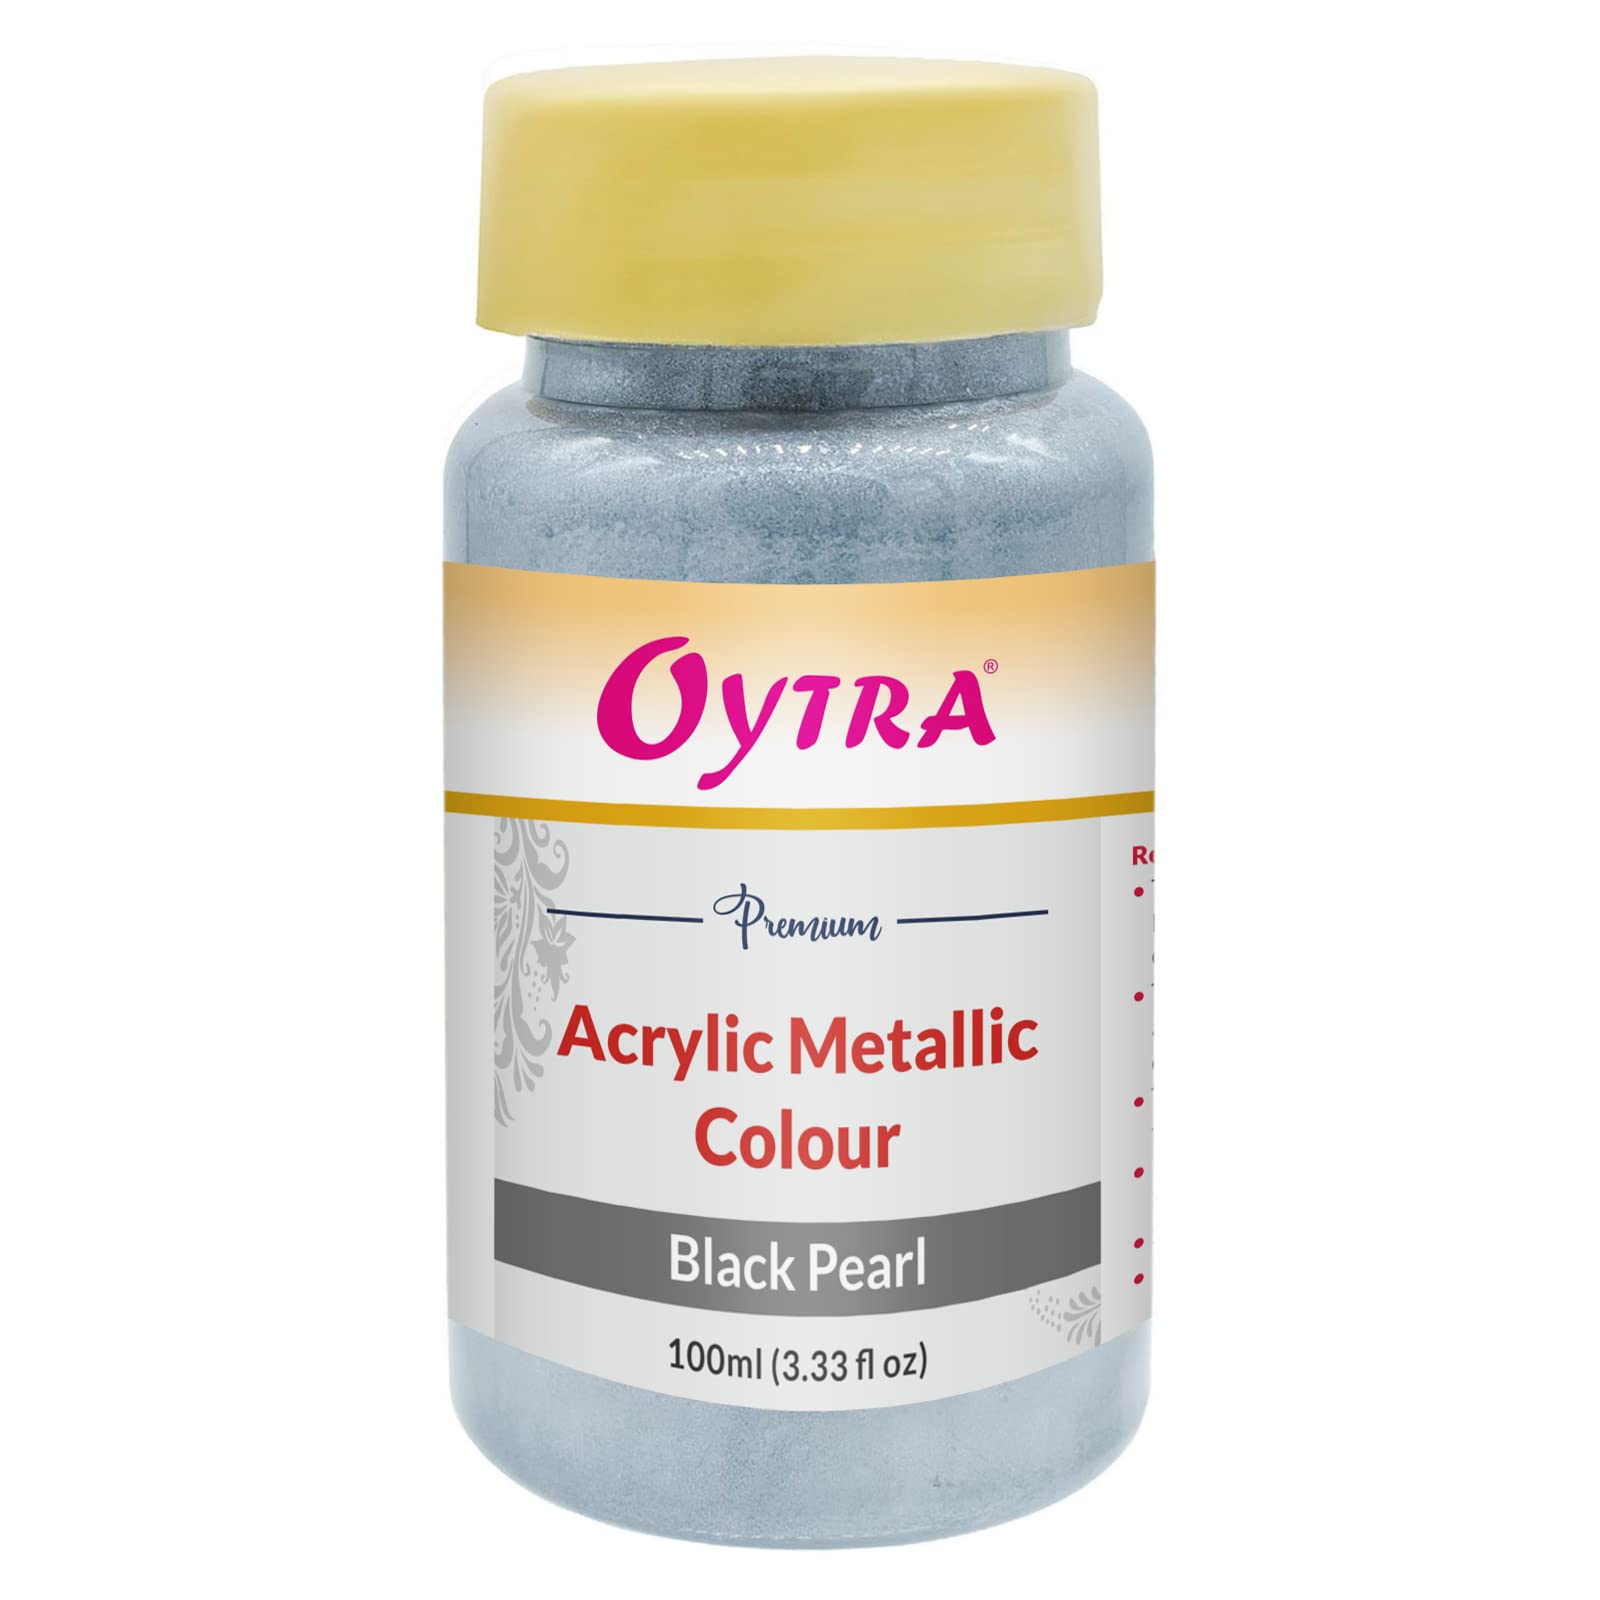 Oytra 100 ml Metallic Acrylic Color Paint Metal Colours for Professionals Artist Hobby Painters DIY Art and Craft Painting Drawings on Canvas (Black Pearl)